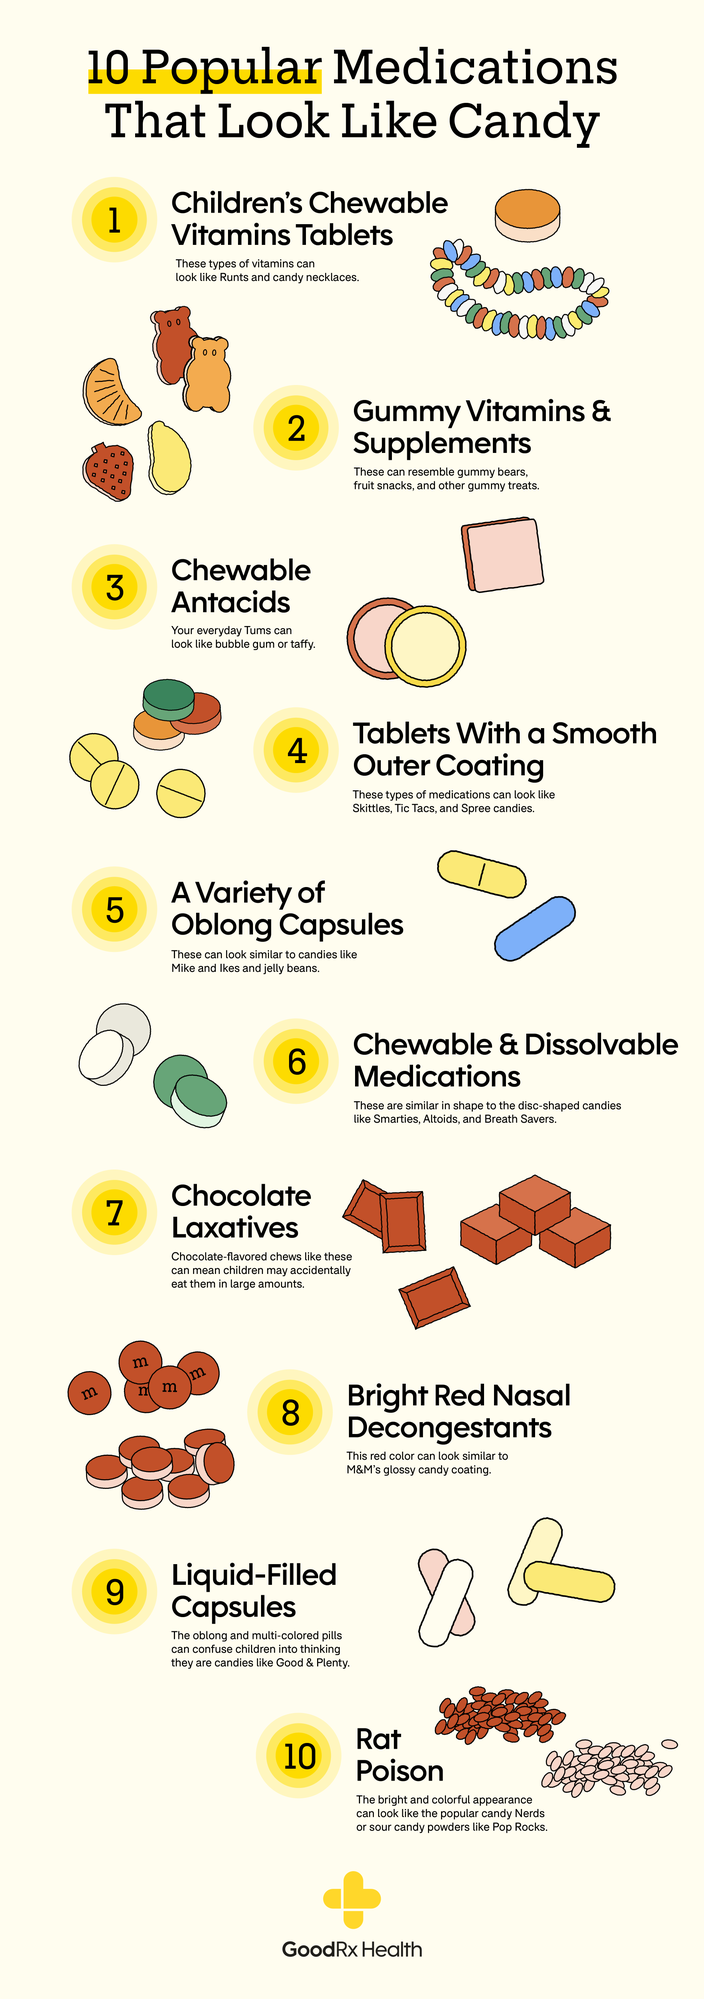 10 Popular Medications That Look Like Candy